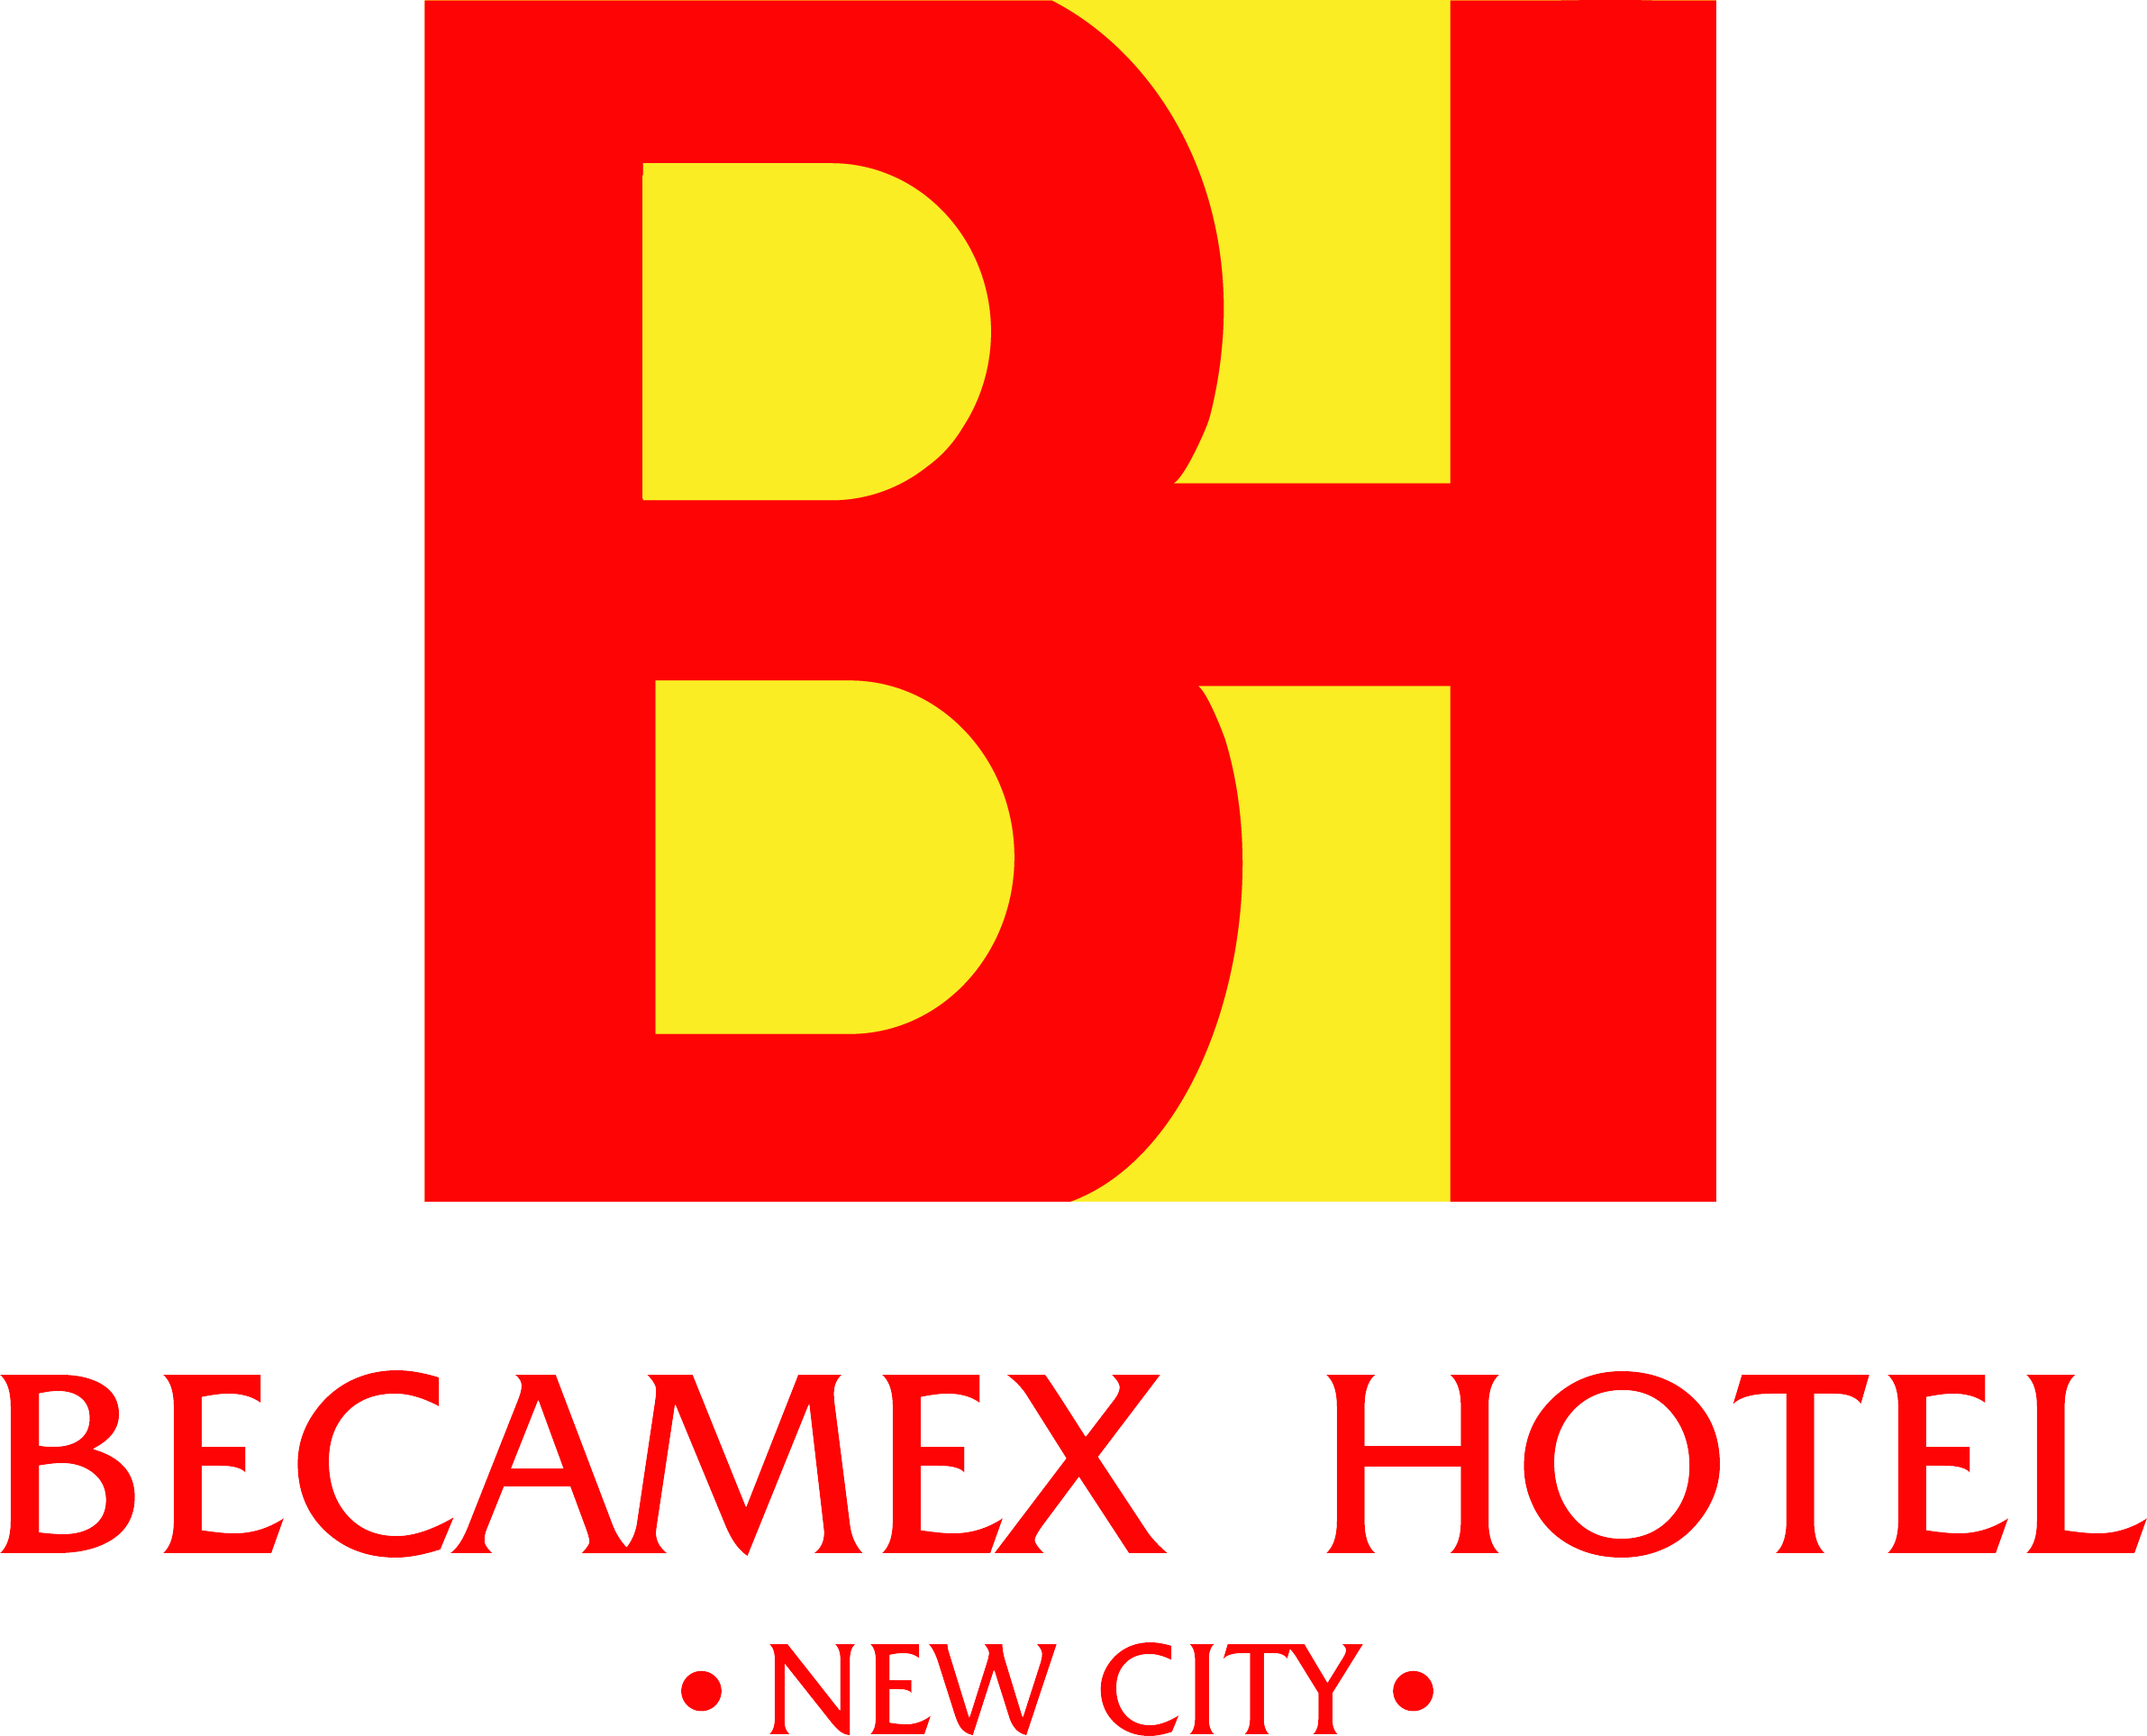 BECAMEX HOTEL BINH DUONG NEW CITY